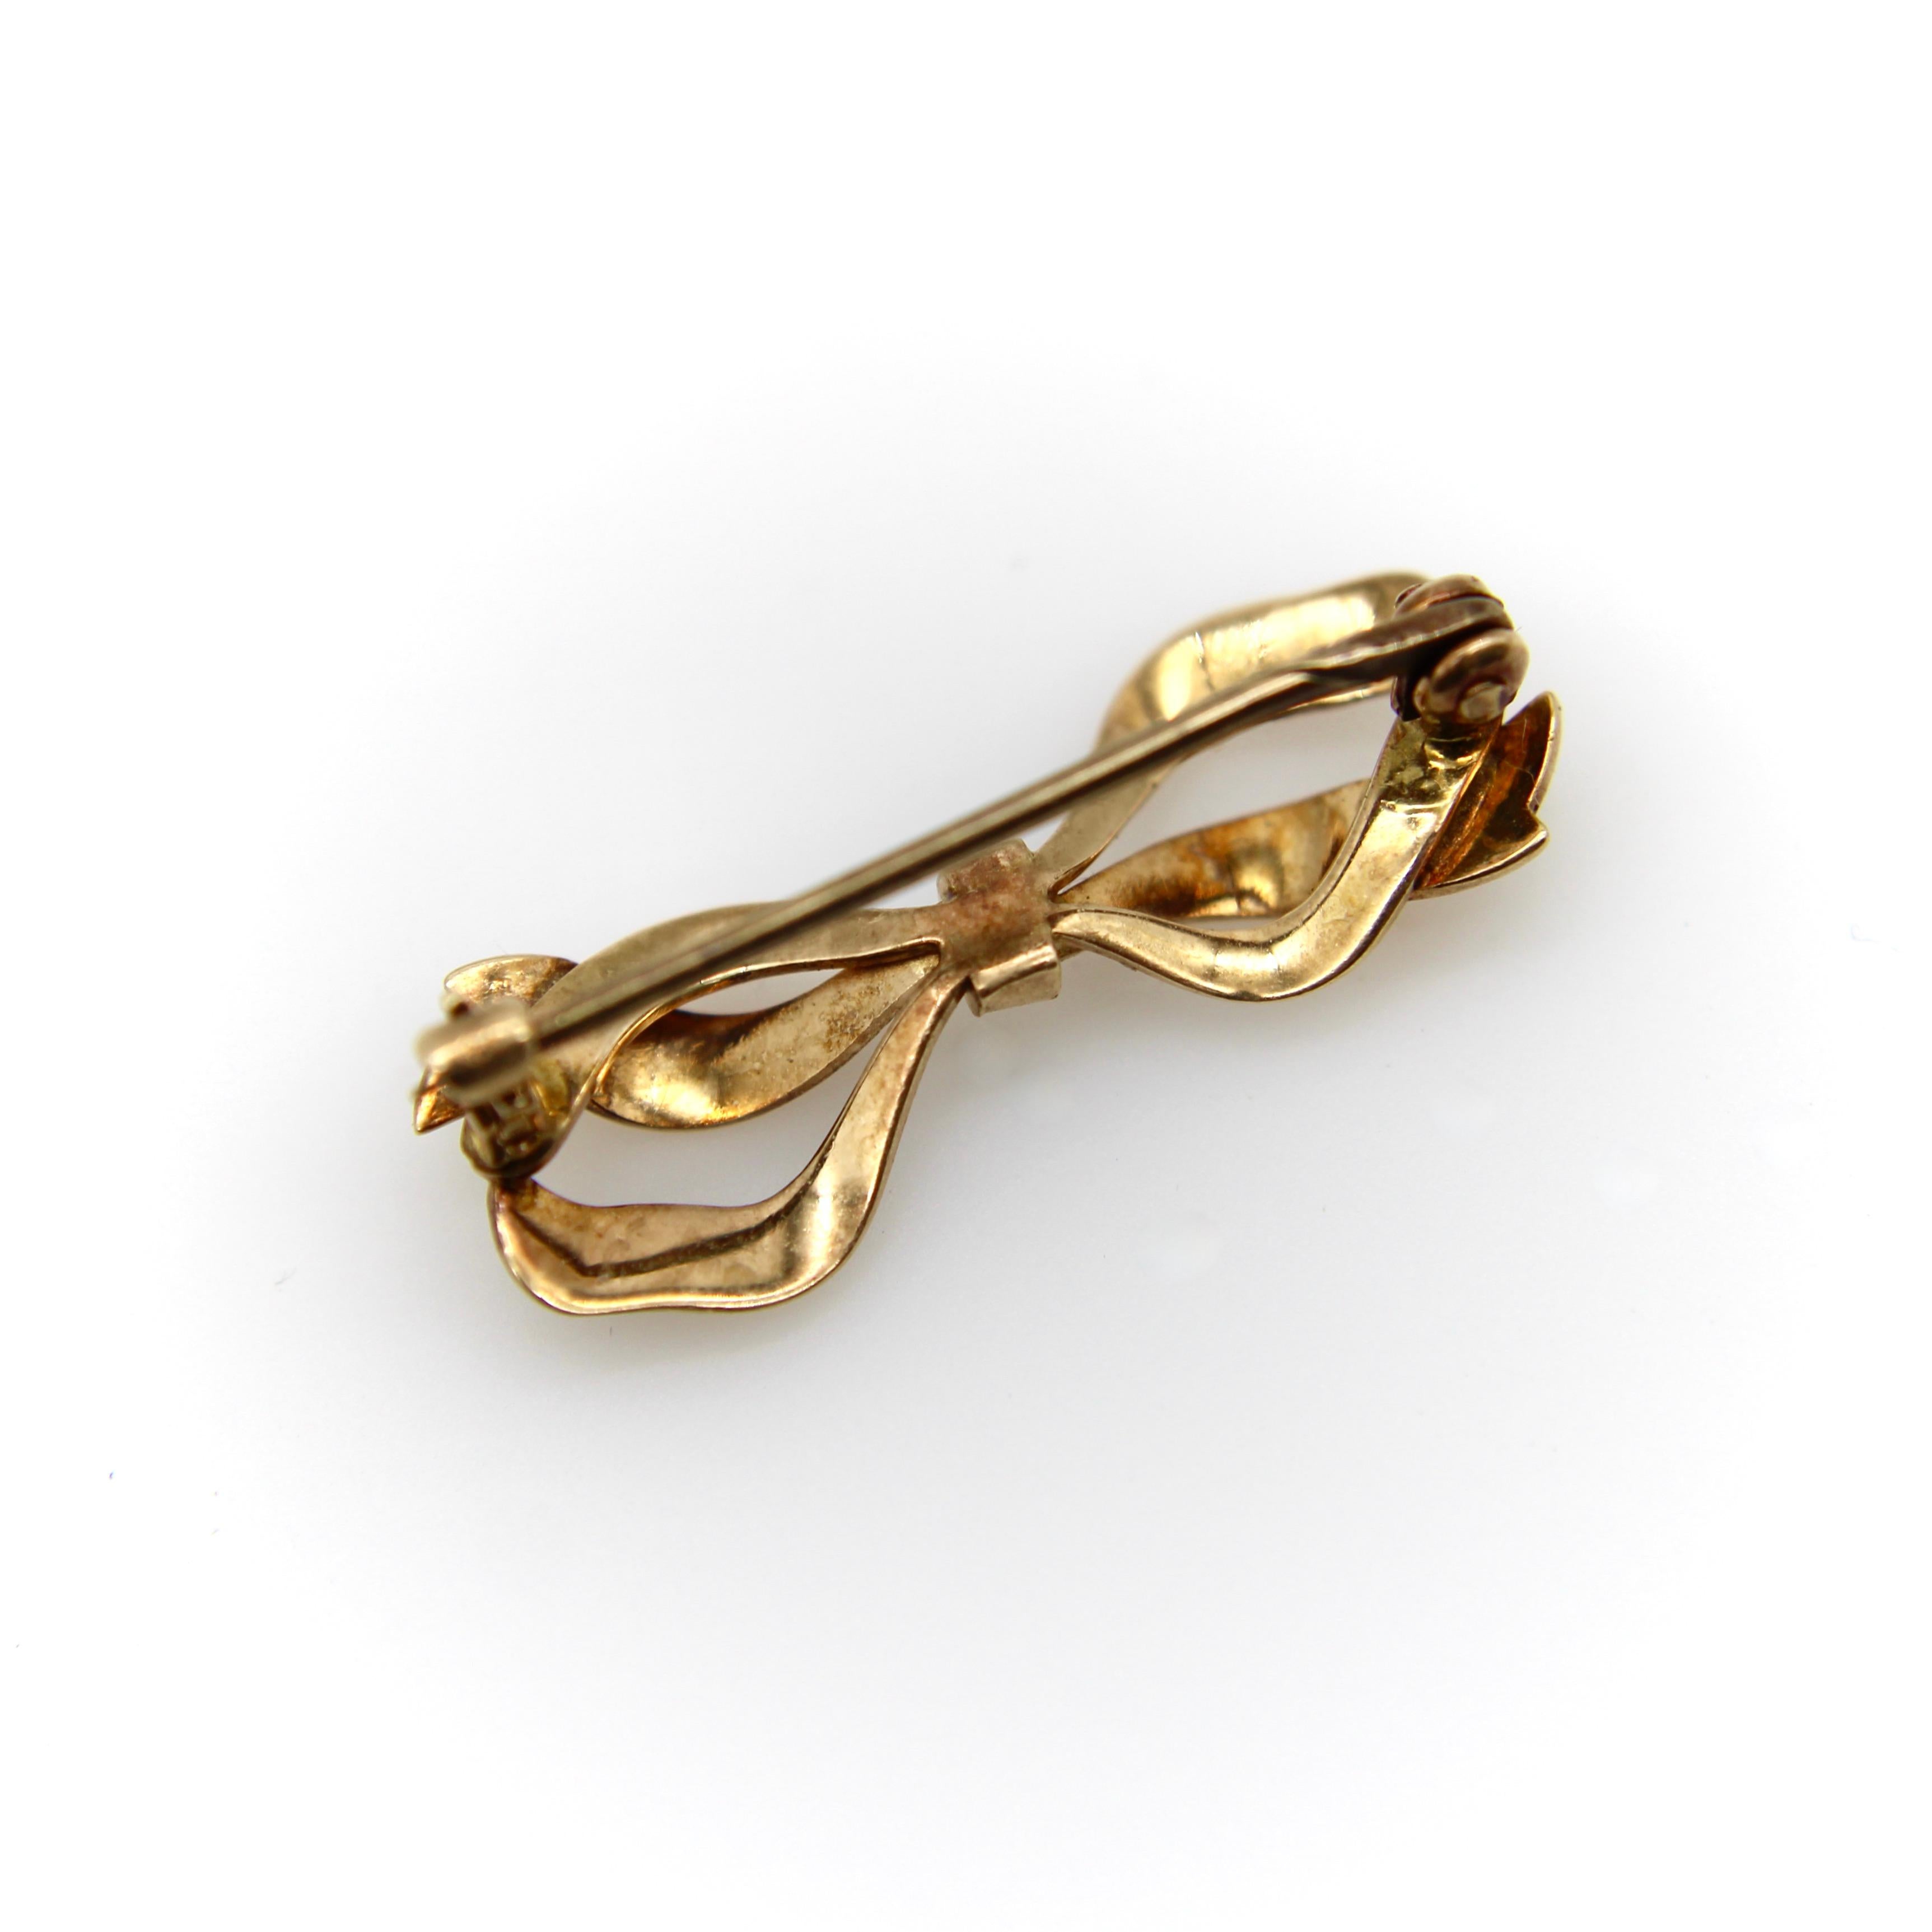 Women's or Men's Victorian Adorable 14K Gold Bow Pin or Brooch 